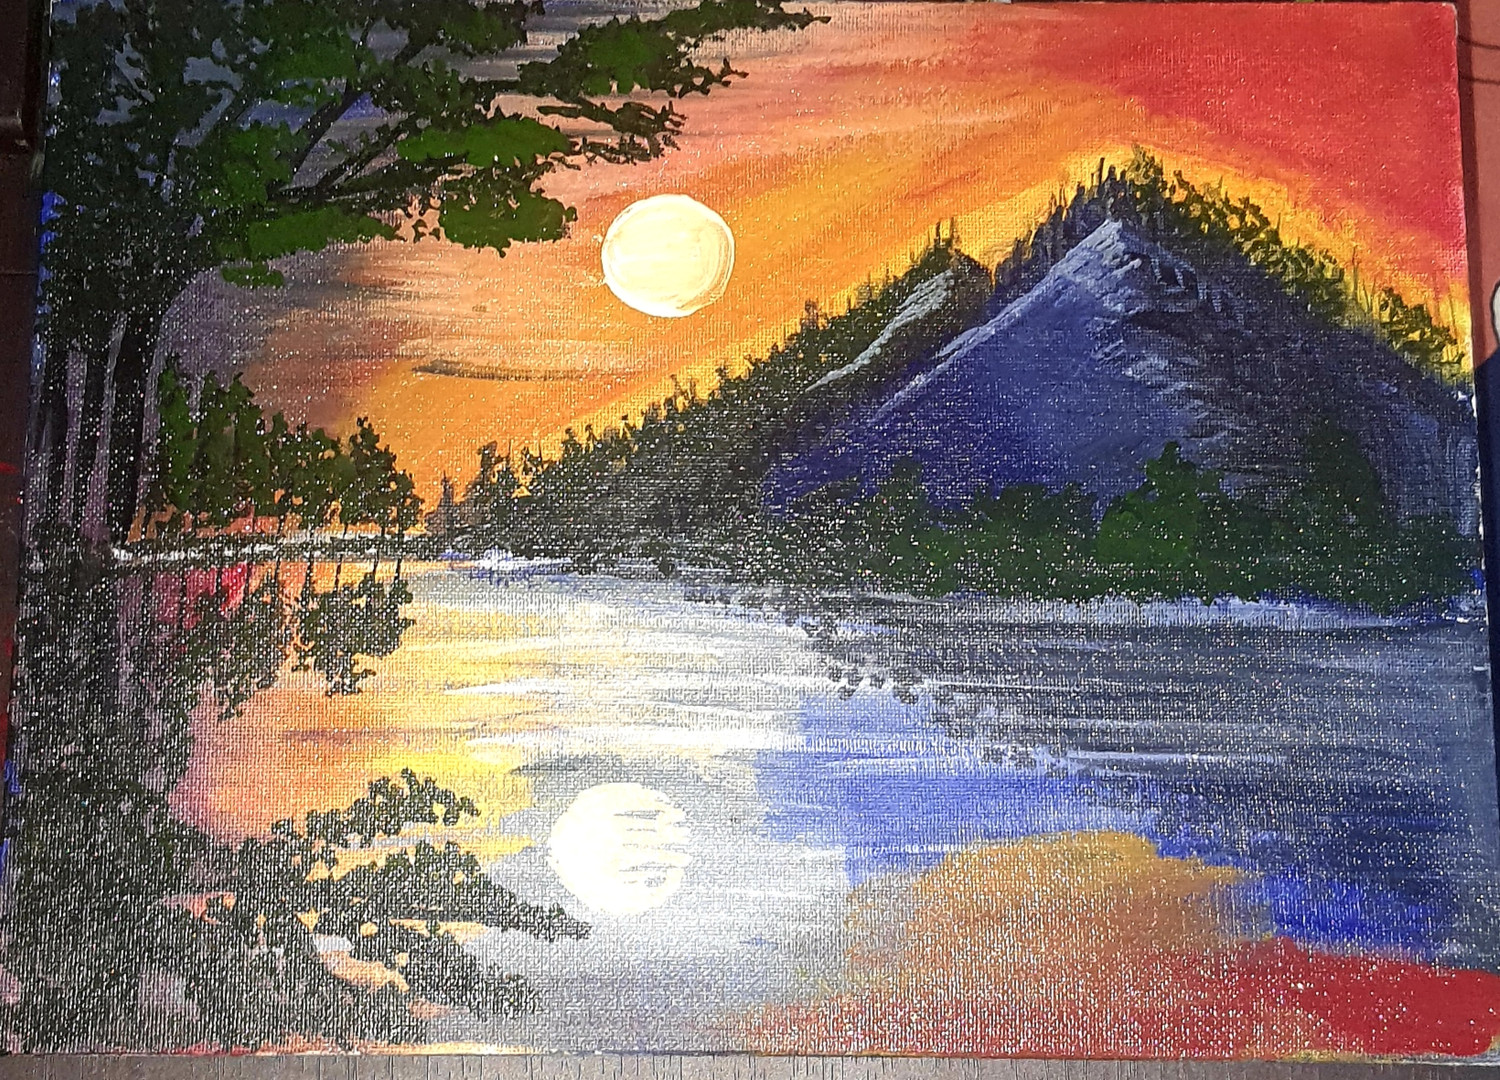 Day and Night scenery drawing with Oil Pastels - step by step drawing for  beginners | Day and Night scenery drawing with Oil Pastels - step by step  drawing for beginners #Drawing #